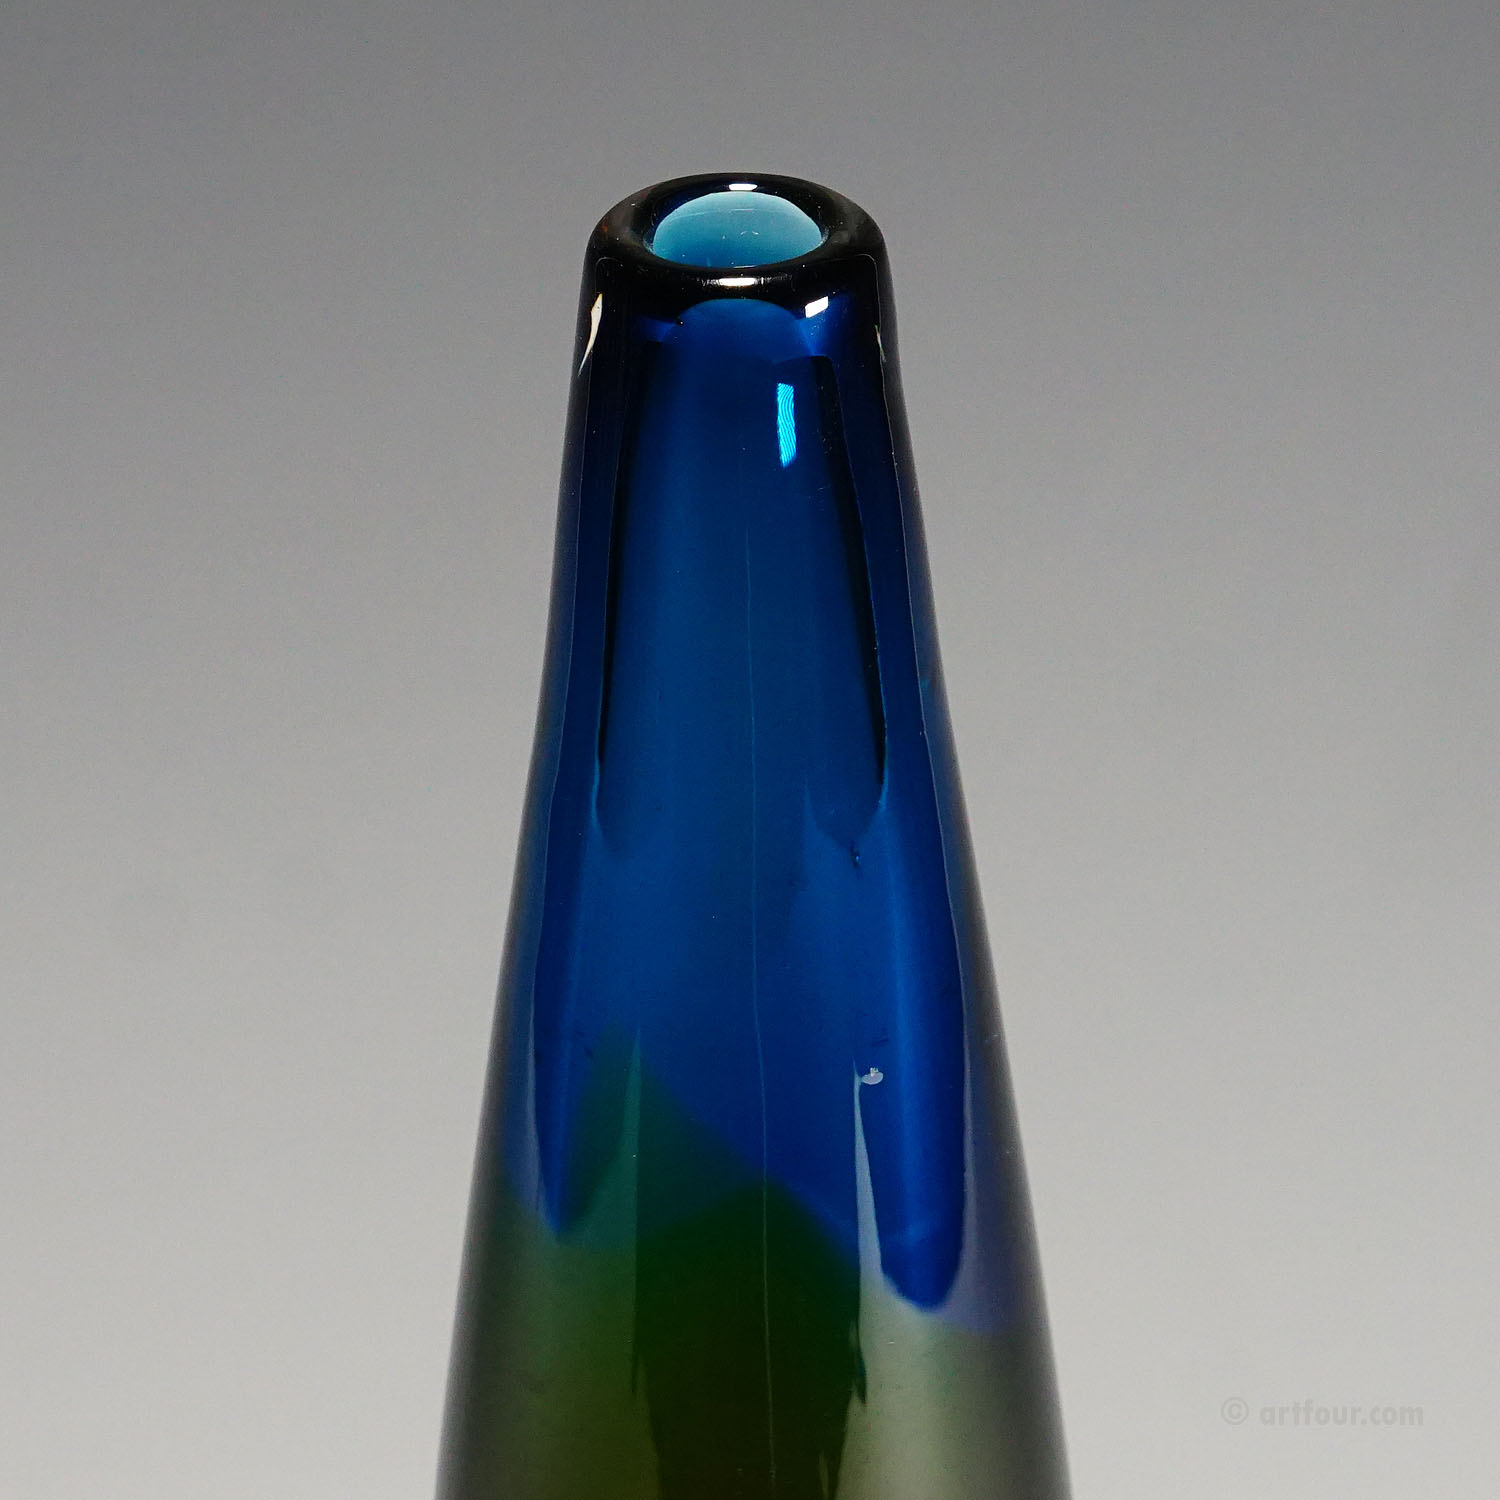 Large Vase in Blue and Yellow by Vicke Lindstrand for Kosta 1960s